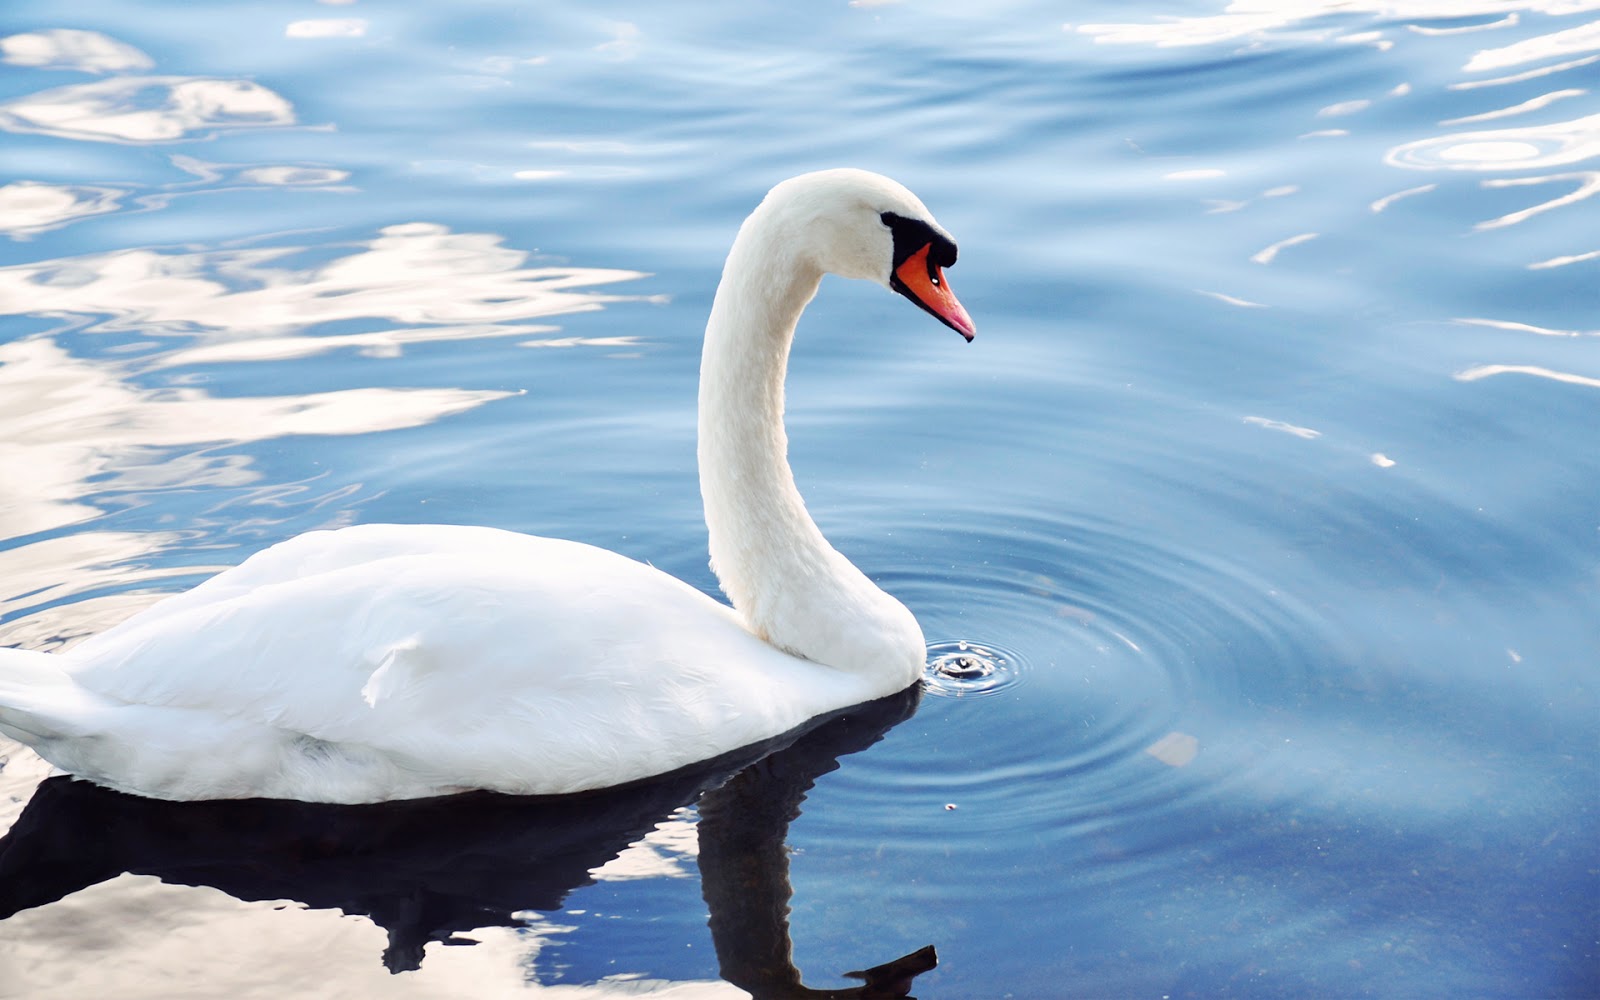 A Place For Free HD Wallpapers | Desktop Wallpapers: Swan ...